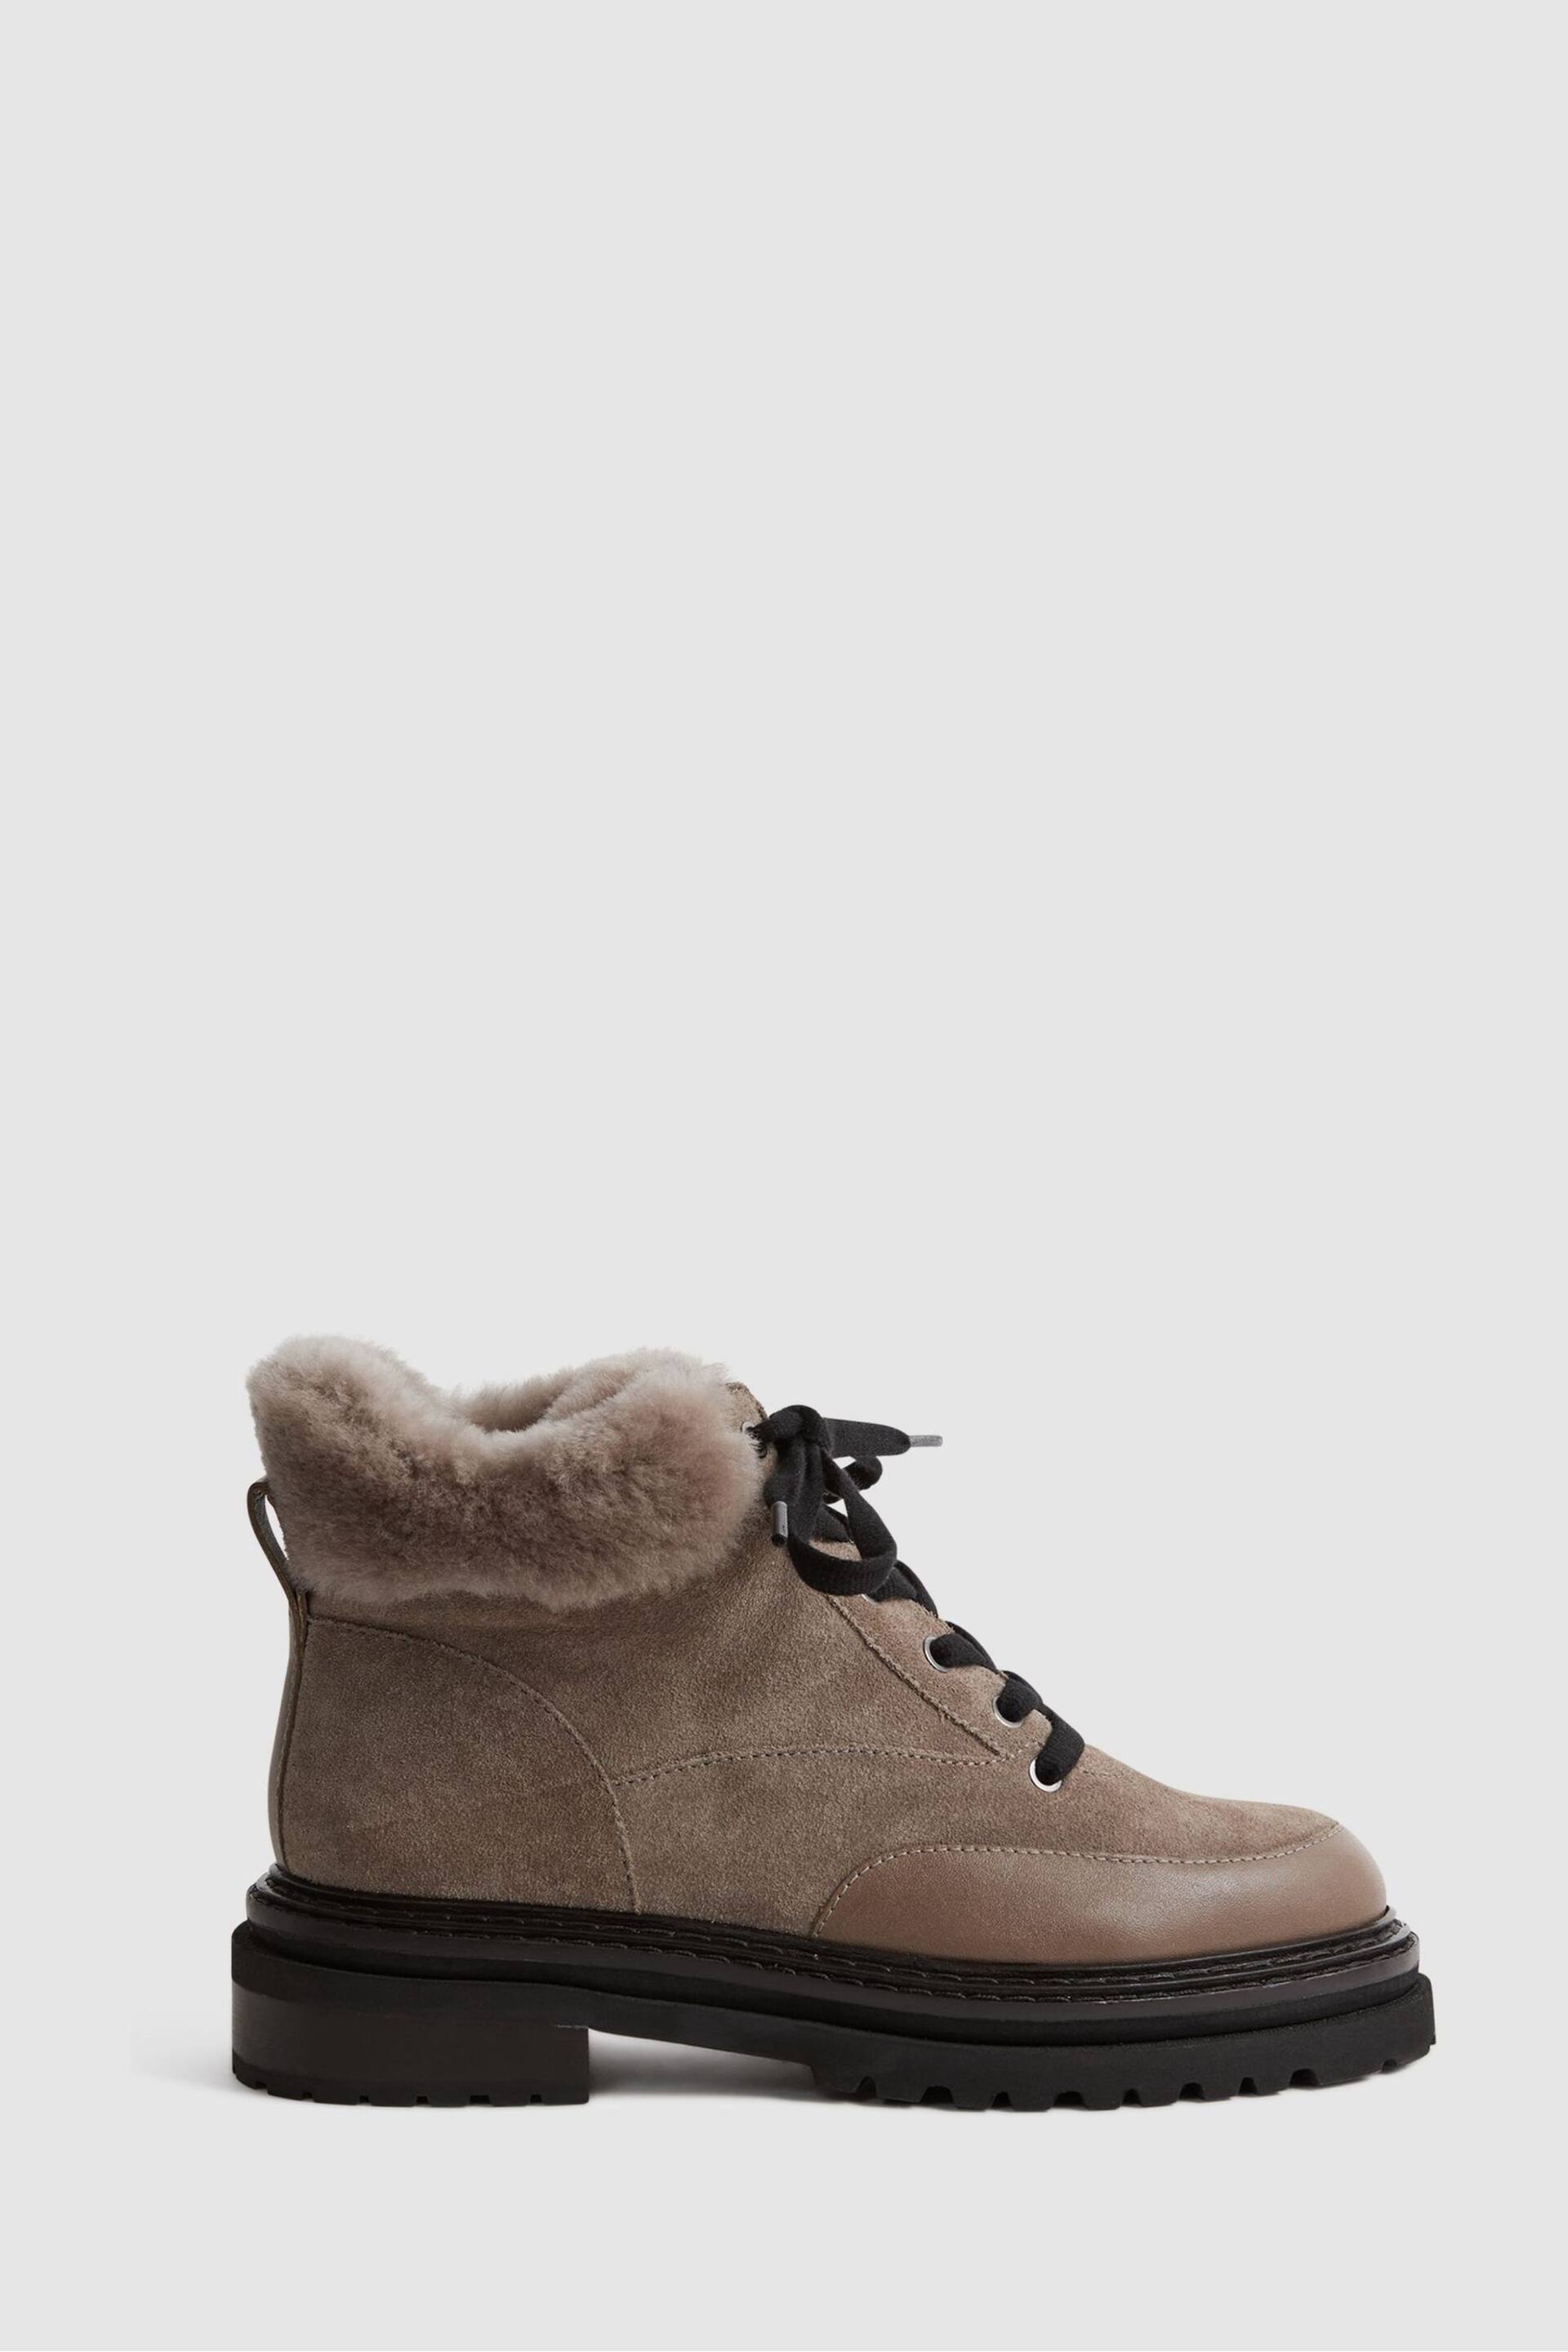 Reiss Mink Leonie Suede Faux Fur Hiking Boots - Image 1 of 5